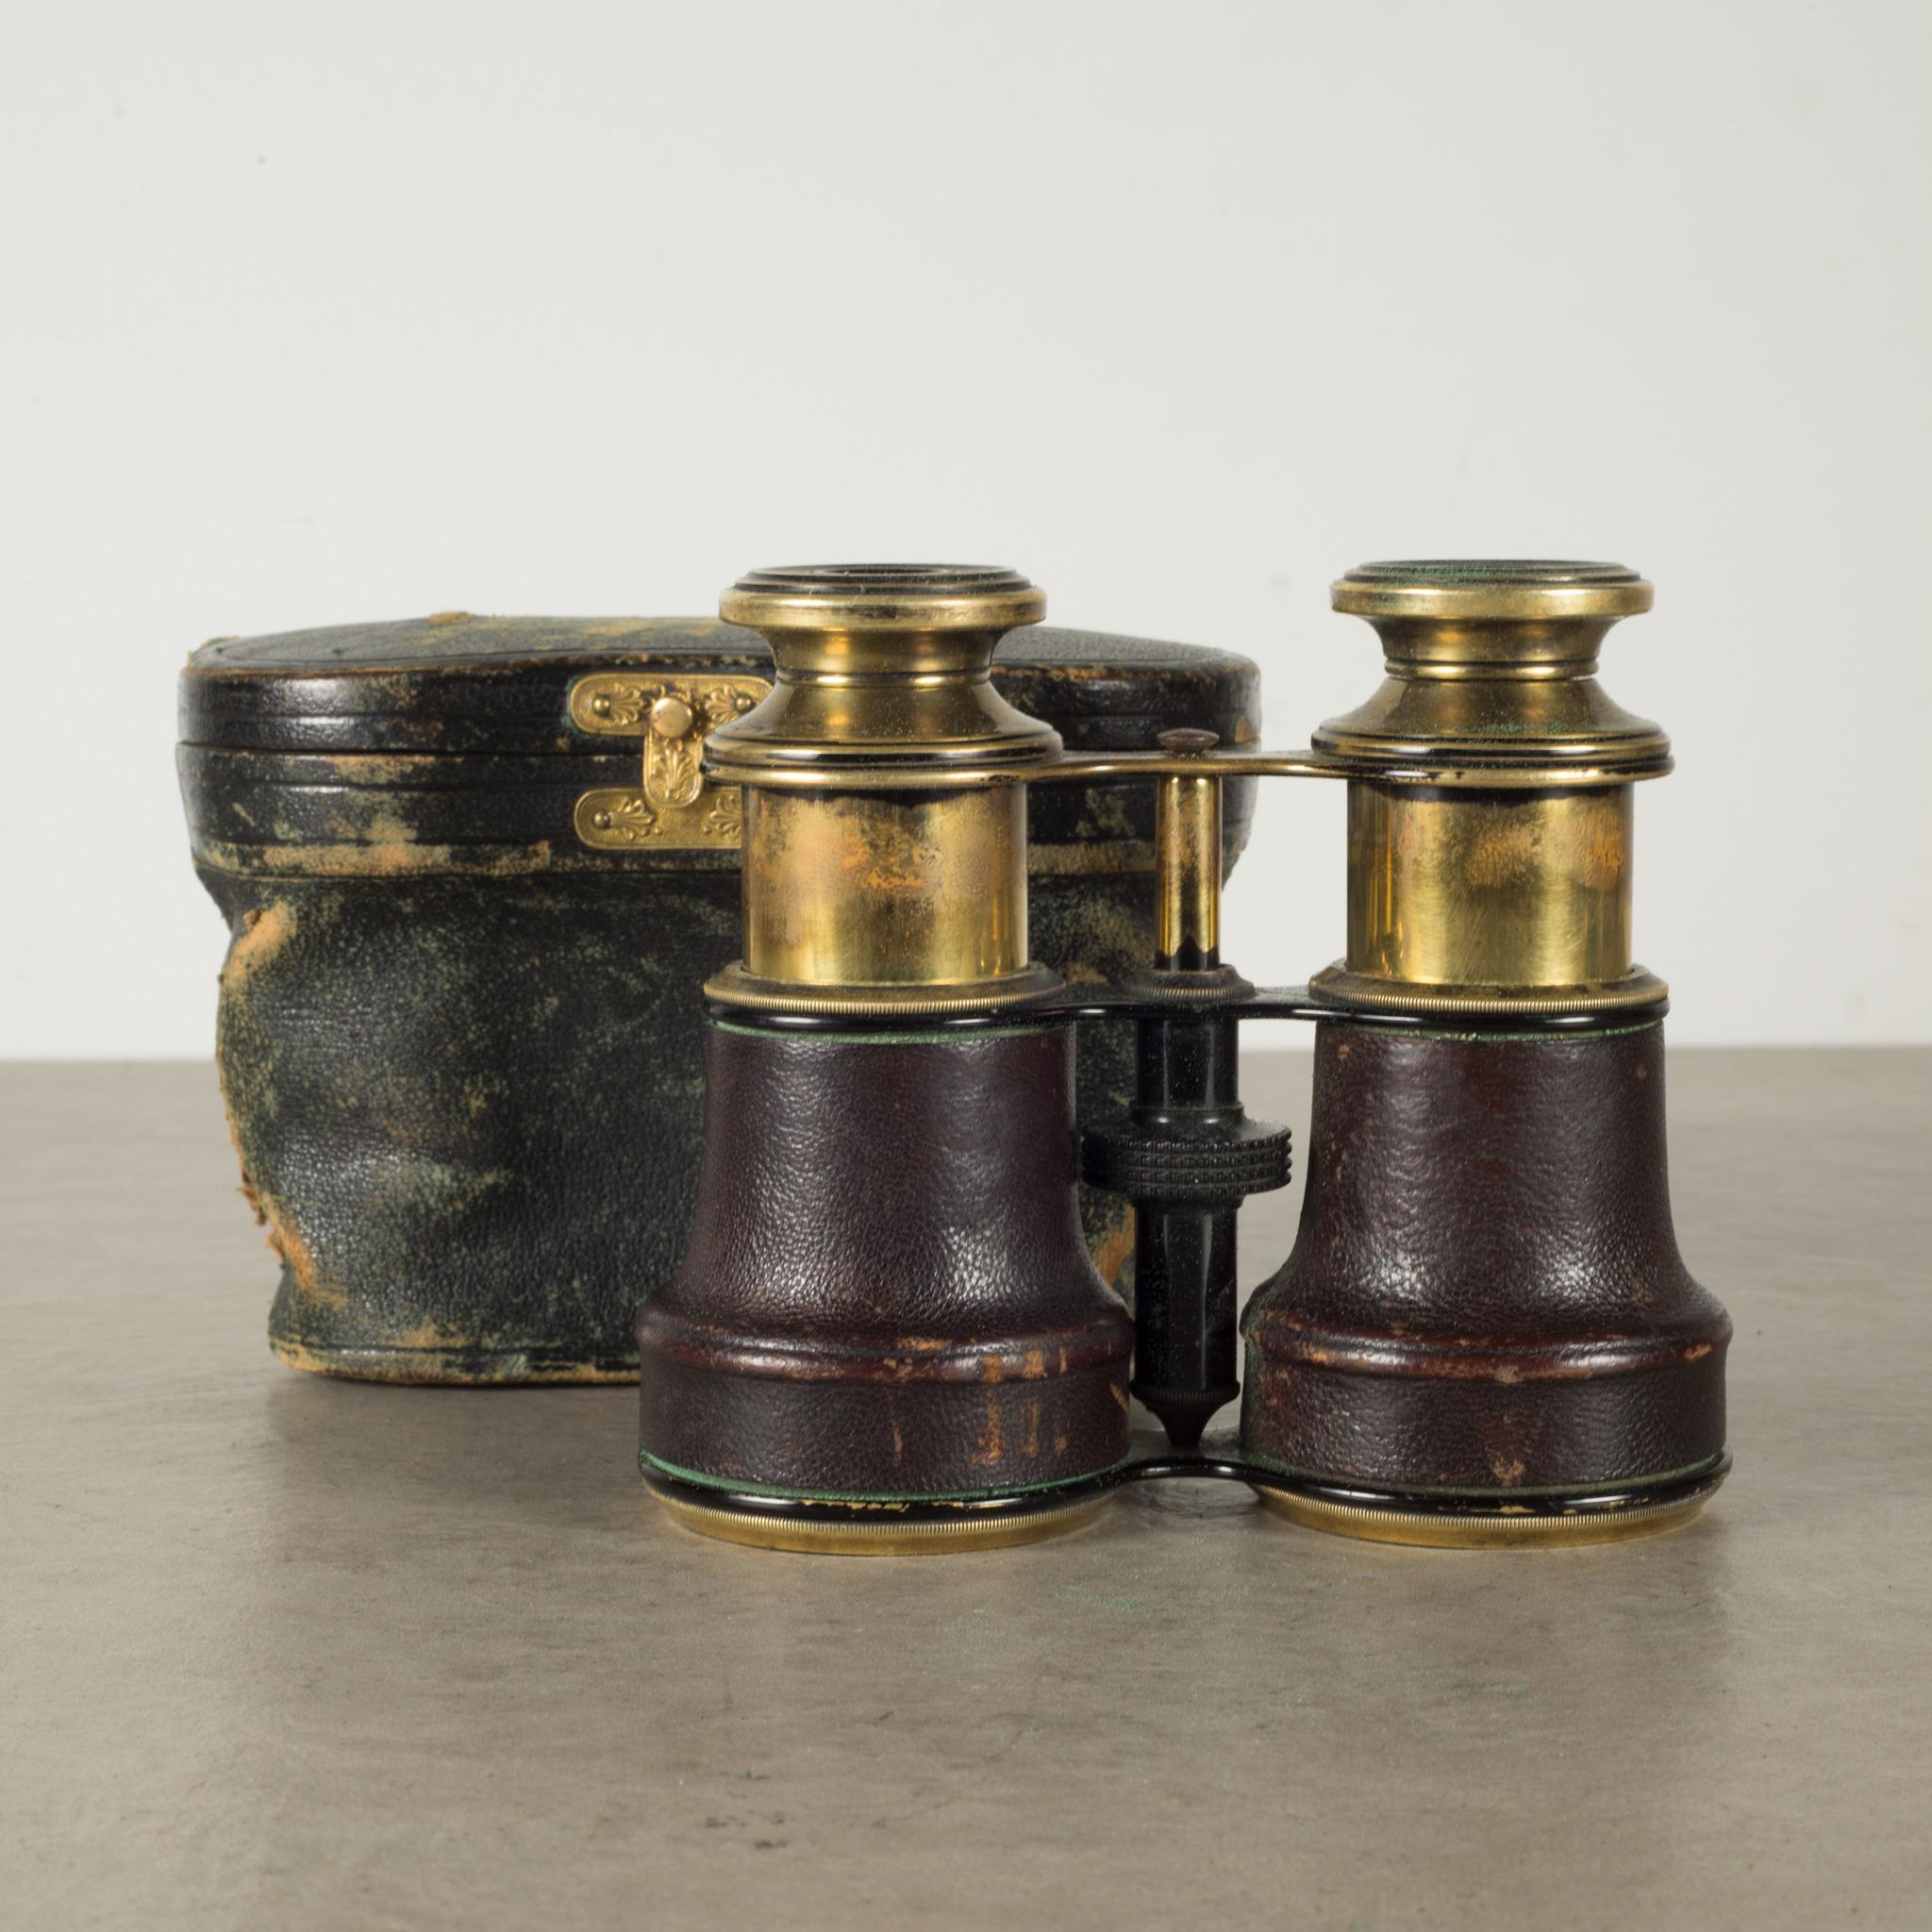 ABOUT

A pair of solid brass binoculars wrapped in leather with original case. The objective lenses are 42 mm in diameter and their optics are good. The barrels are covered with brown leather. The focus wheel works well with good binocular